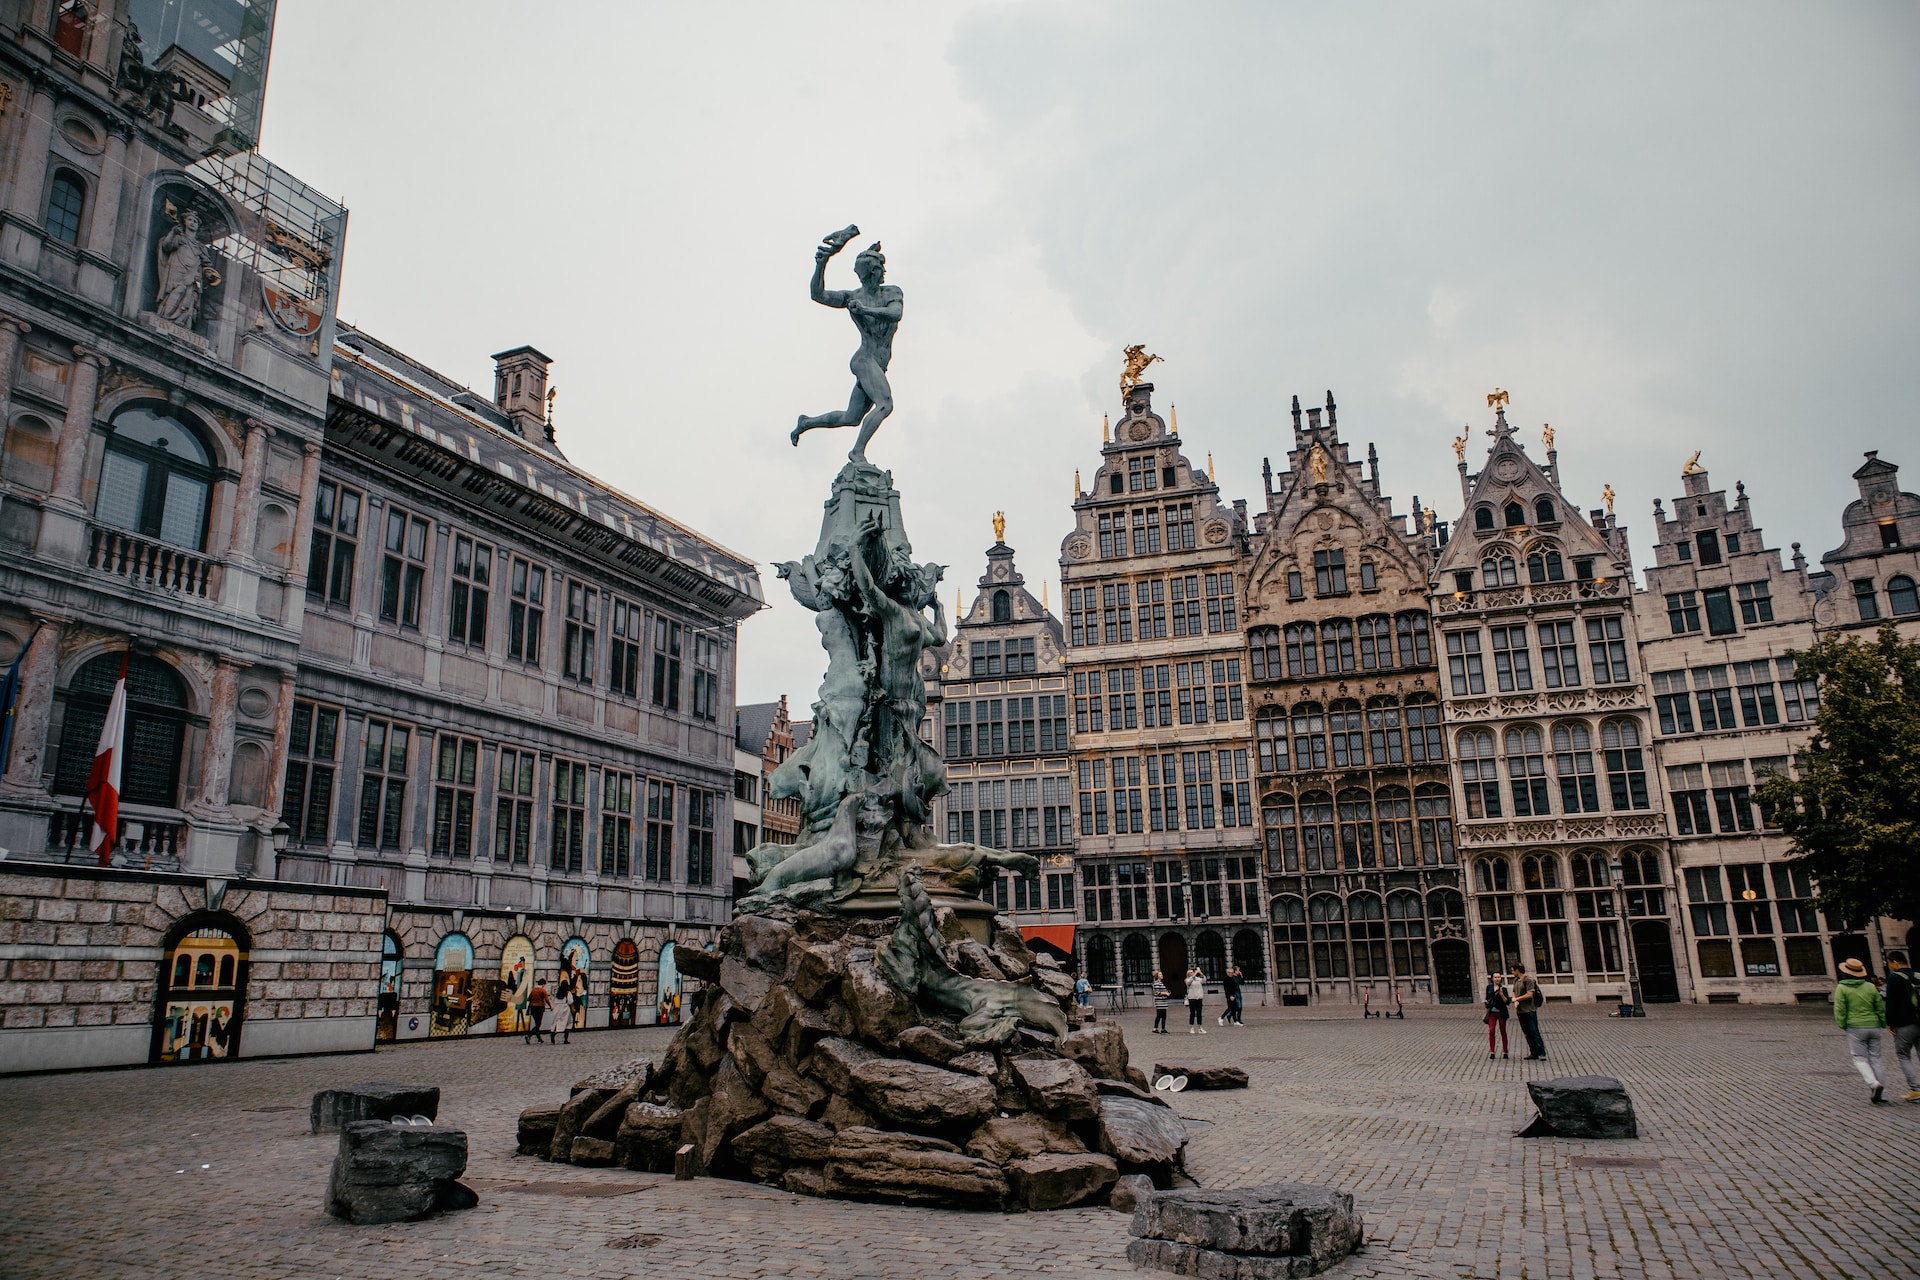 Antwerpen on a Budget: A Guide to Visiting Antwerp Belgium Without Overspending